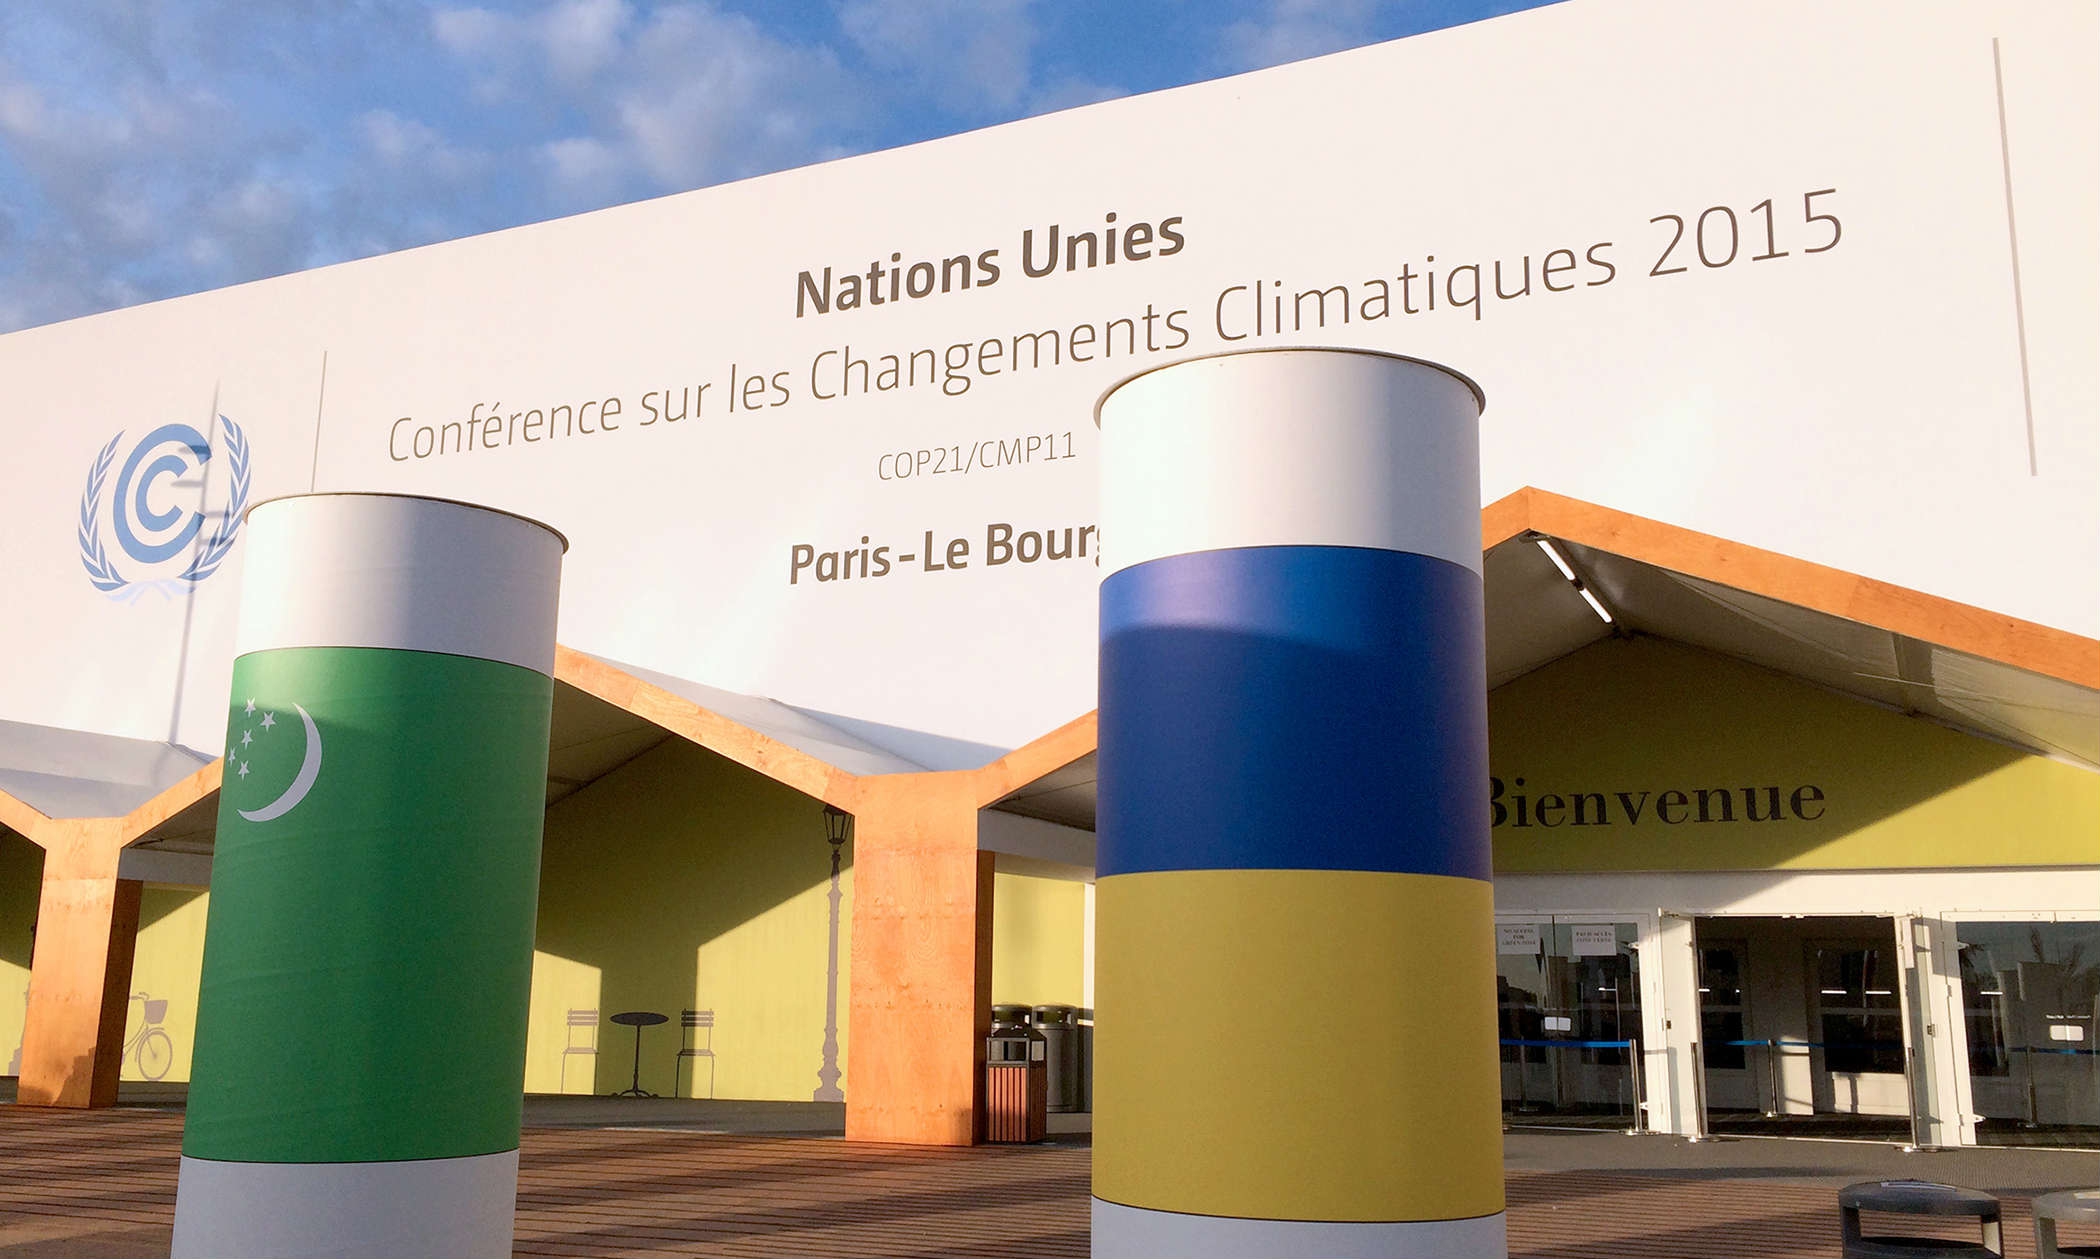 Bosch provides flawless conferencing solution for COP21 climate change summit in Paris